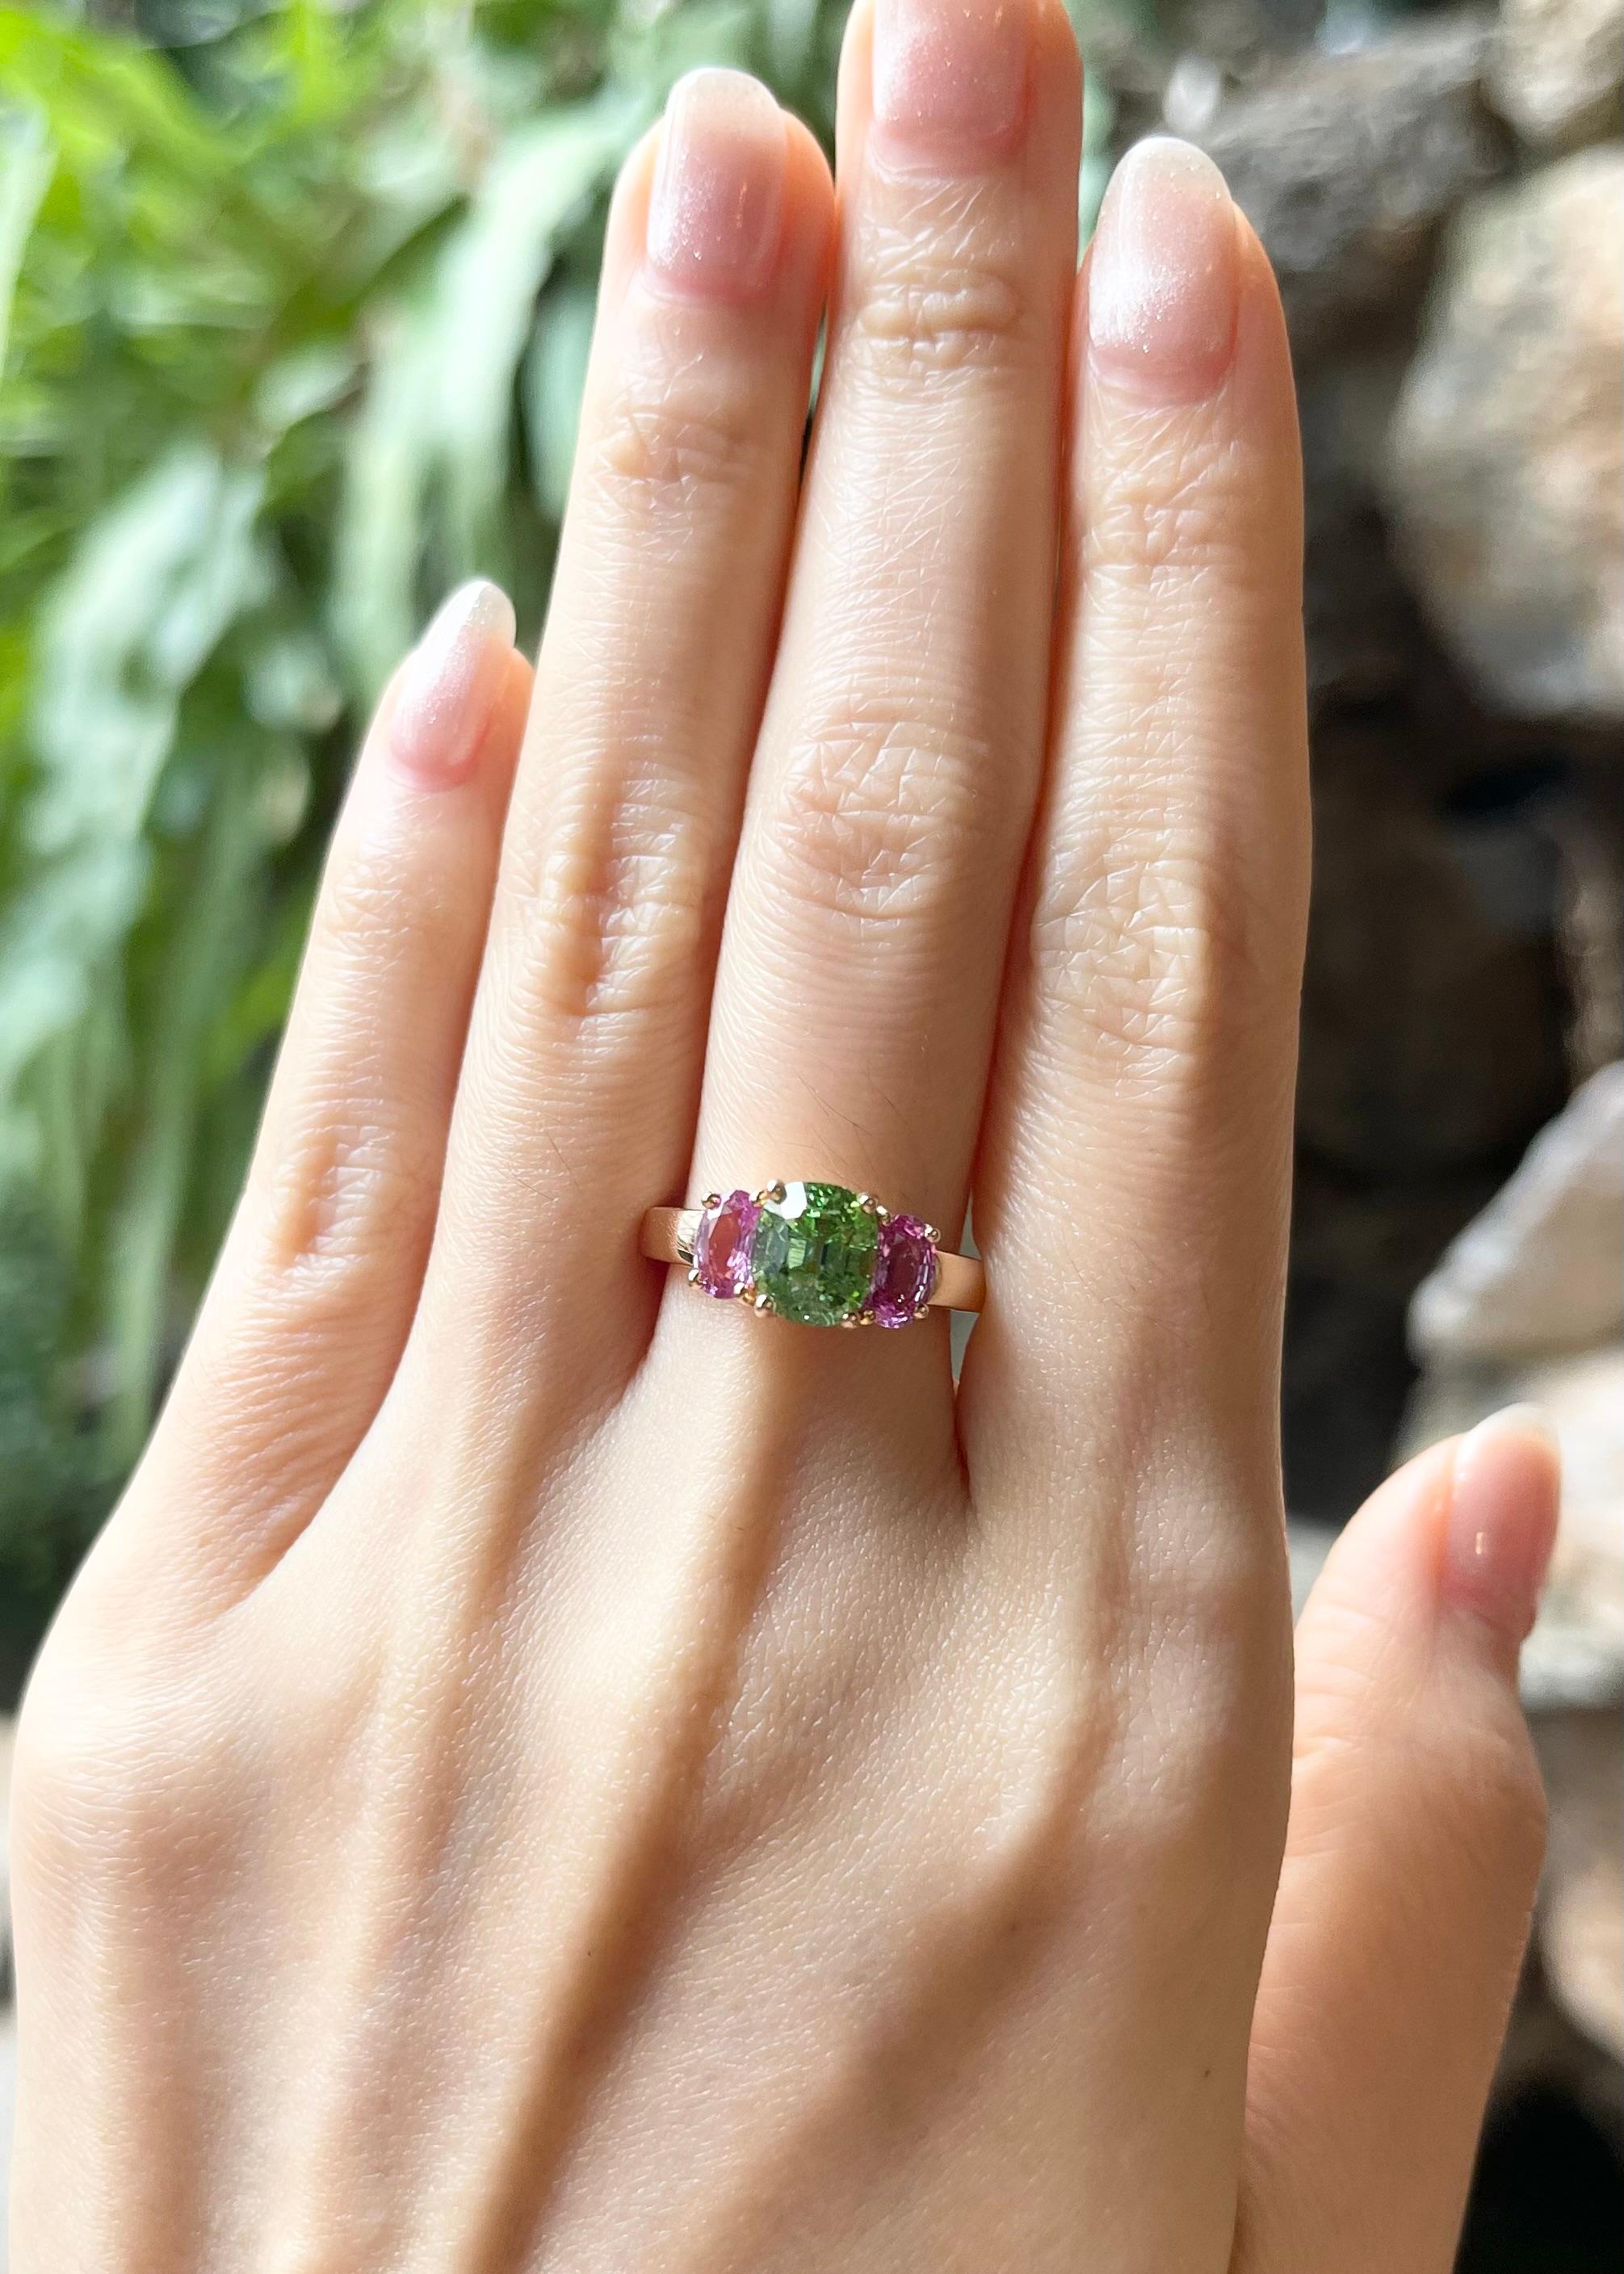 Green Tourmaline 1.99 carats and Pink Sapphire 1.04 carats Ring set in 18K Rose Gold Settings

Width:  1.3cm 
Length: 0.7 cm
Ring Size: 51
Total Weight: 5.81 grams

